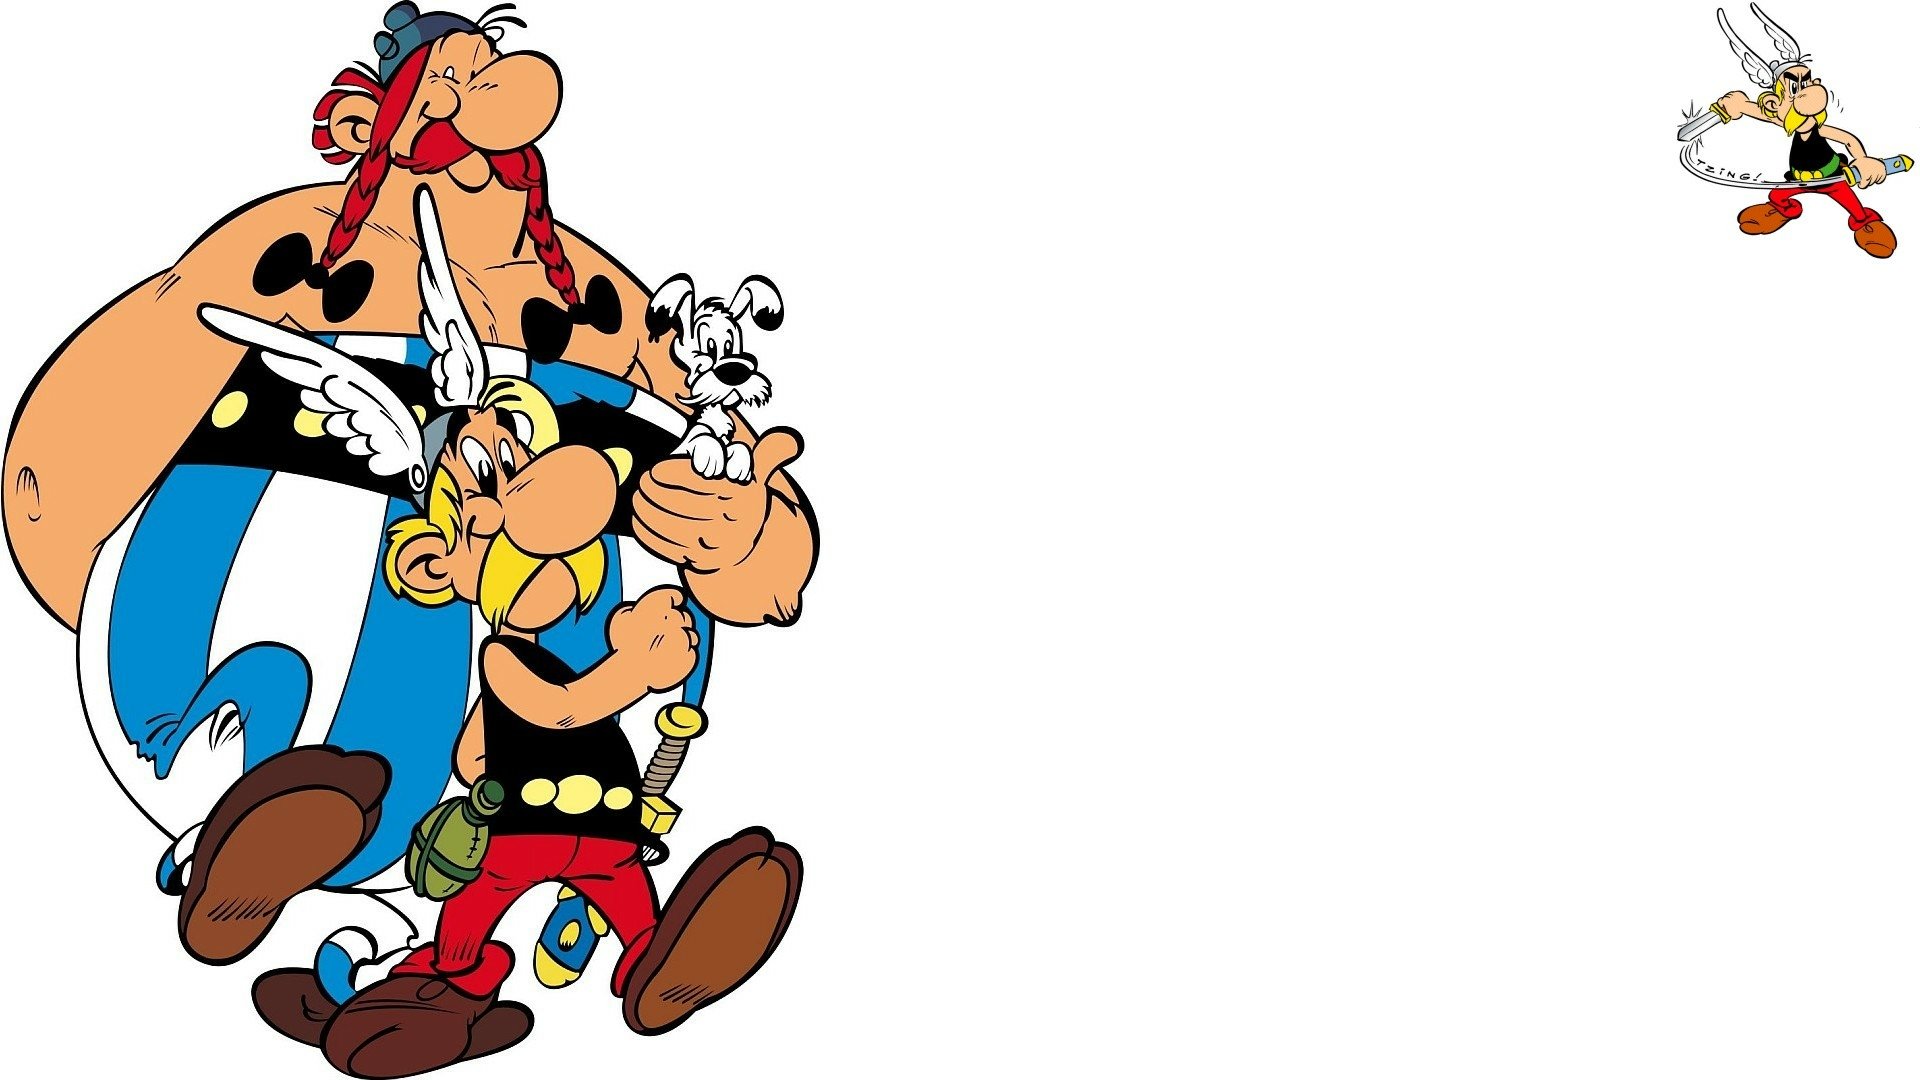 3 Asterix Hd Wallpapers Background Images Wallpaper Abyss Images, Photos, Reviews